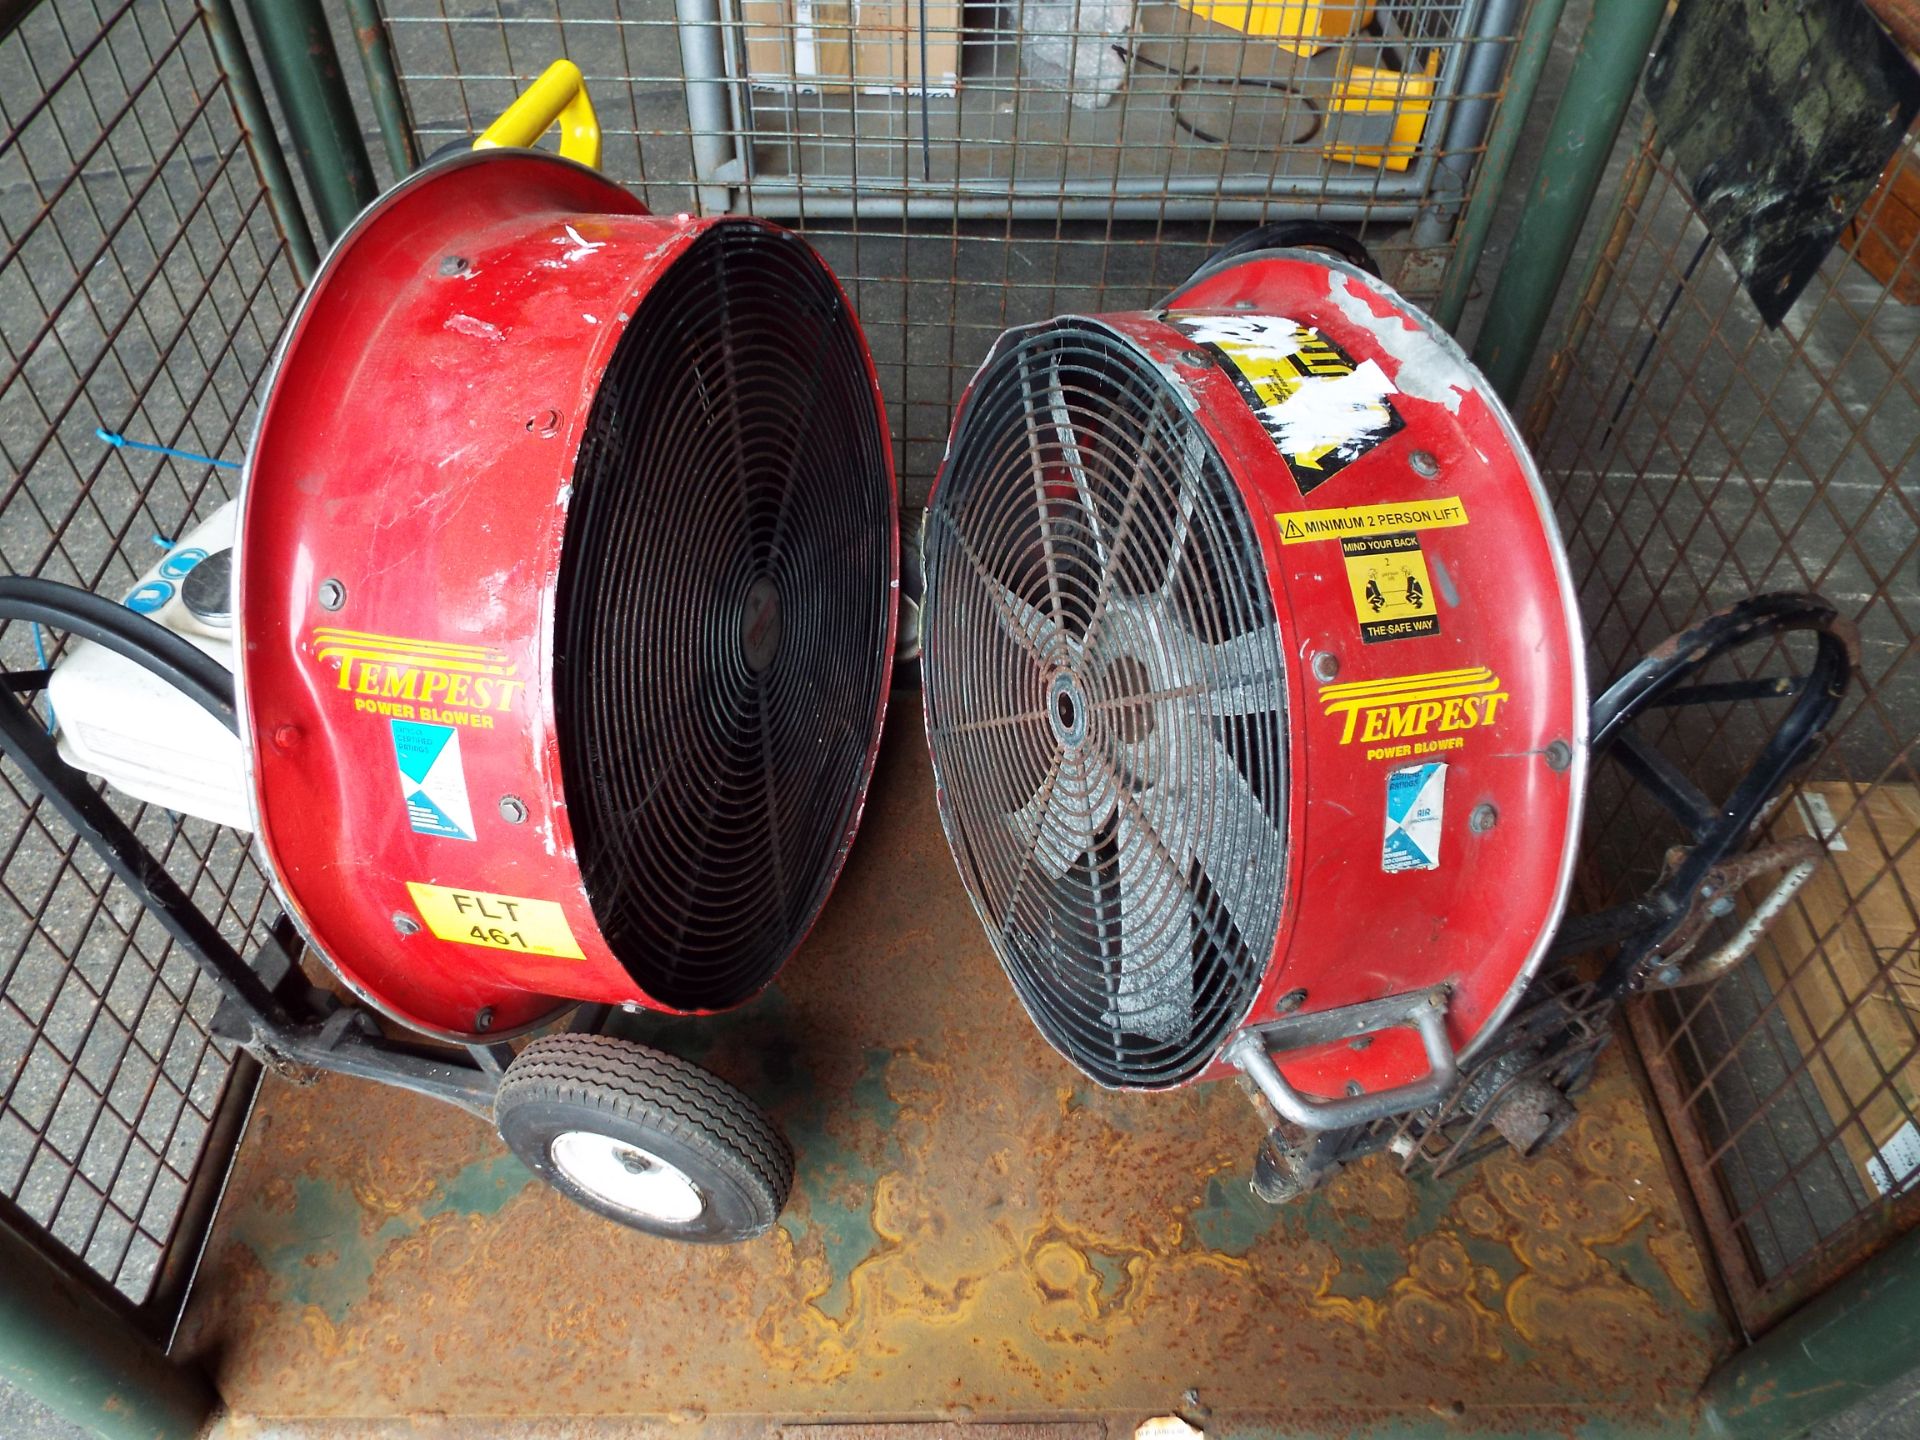 2 x Tempest 21" Power Blowers